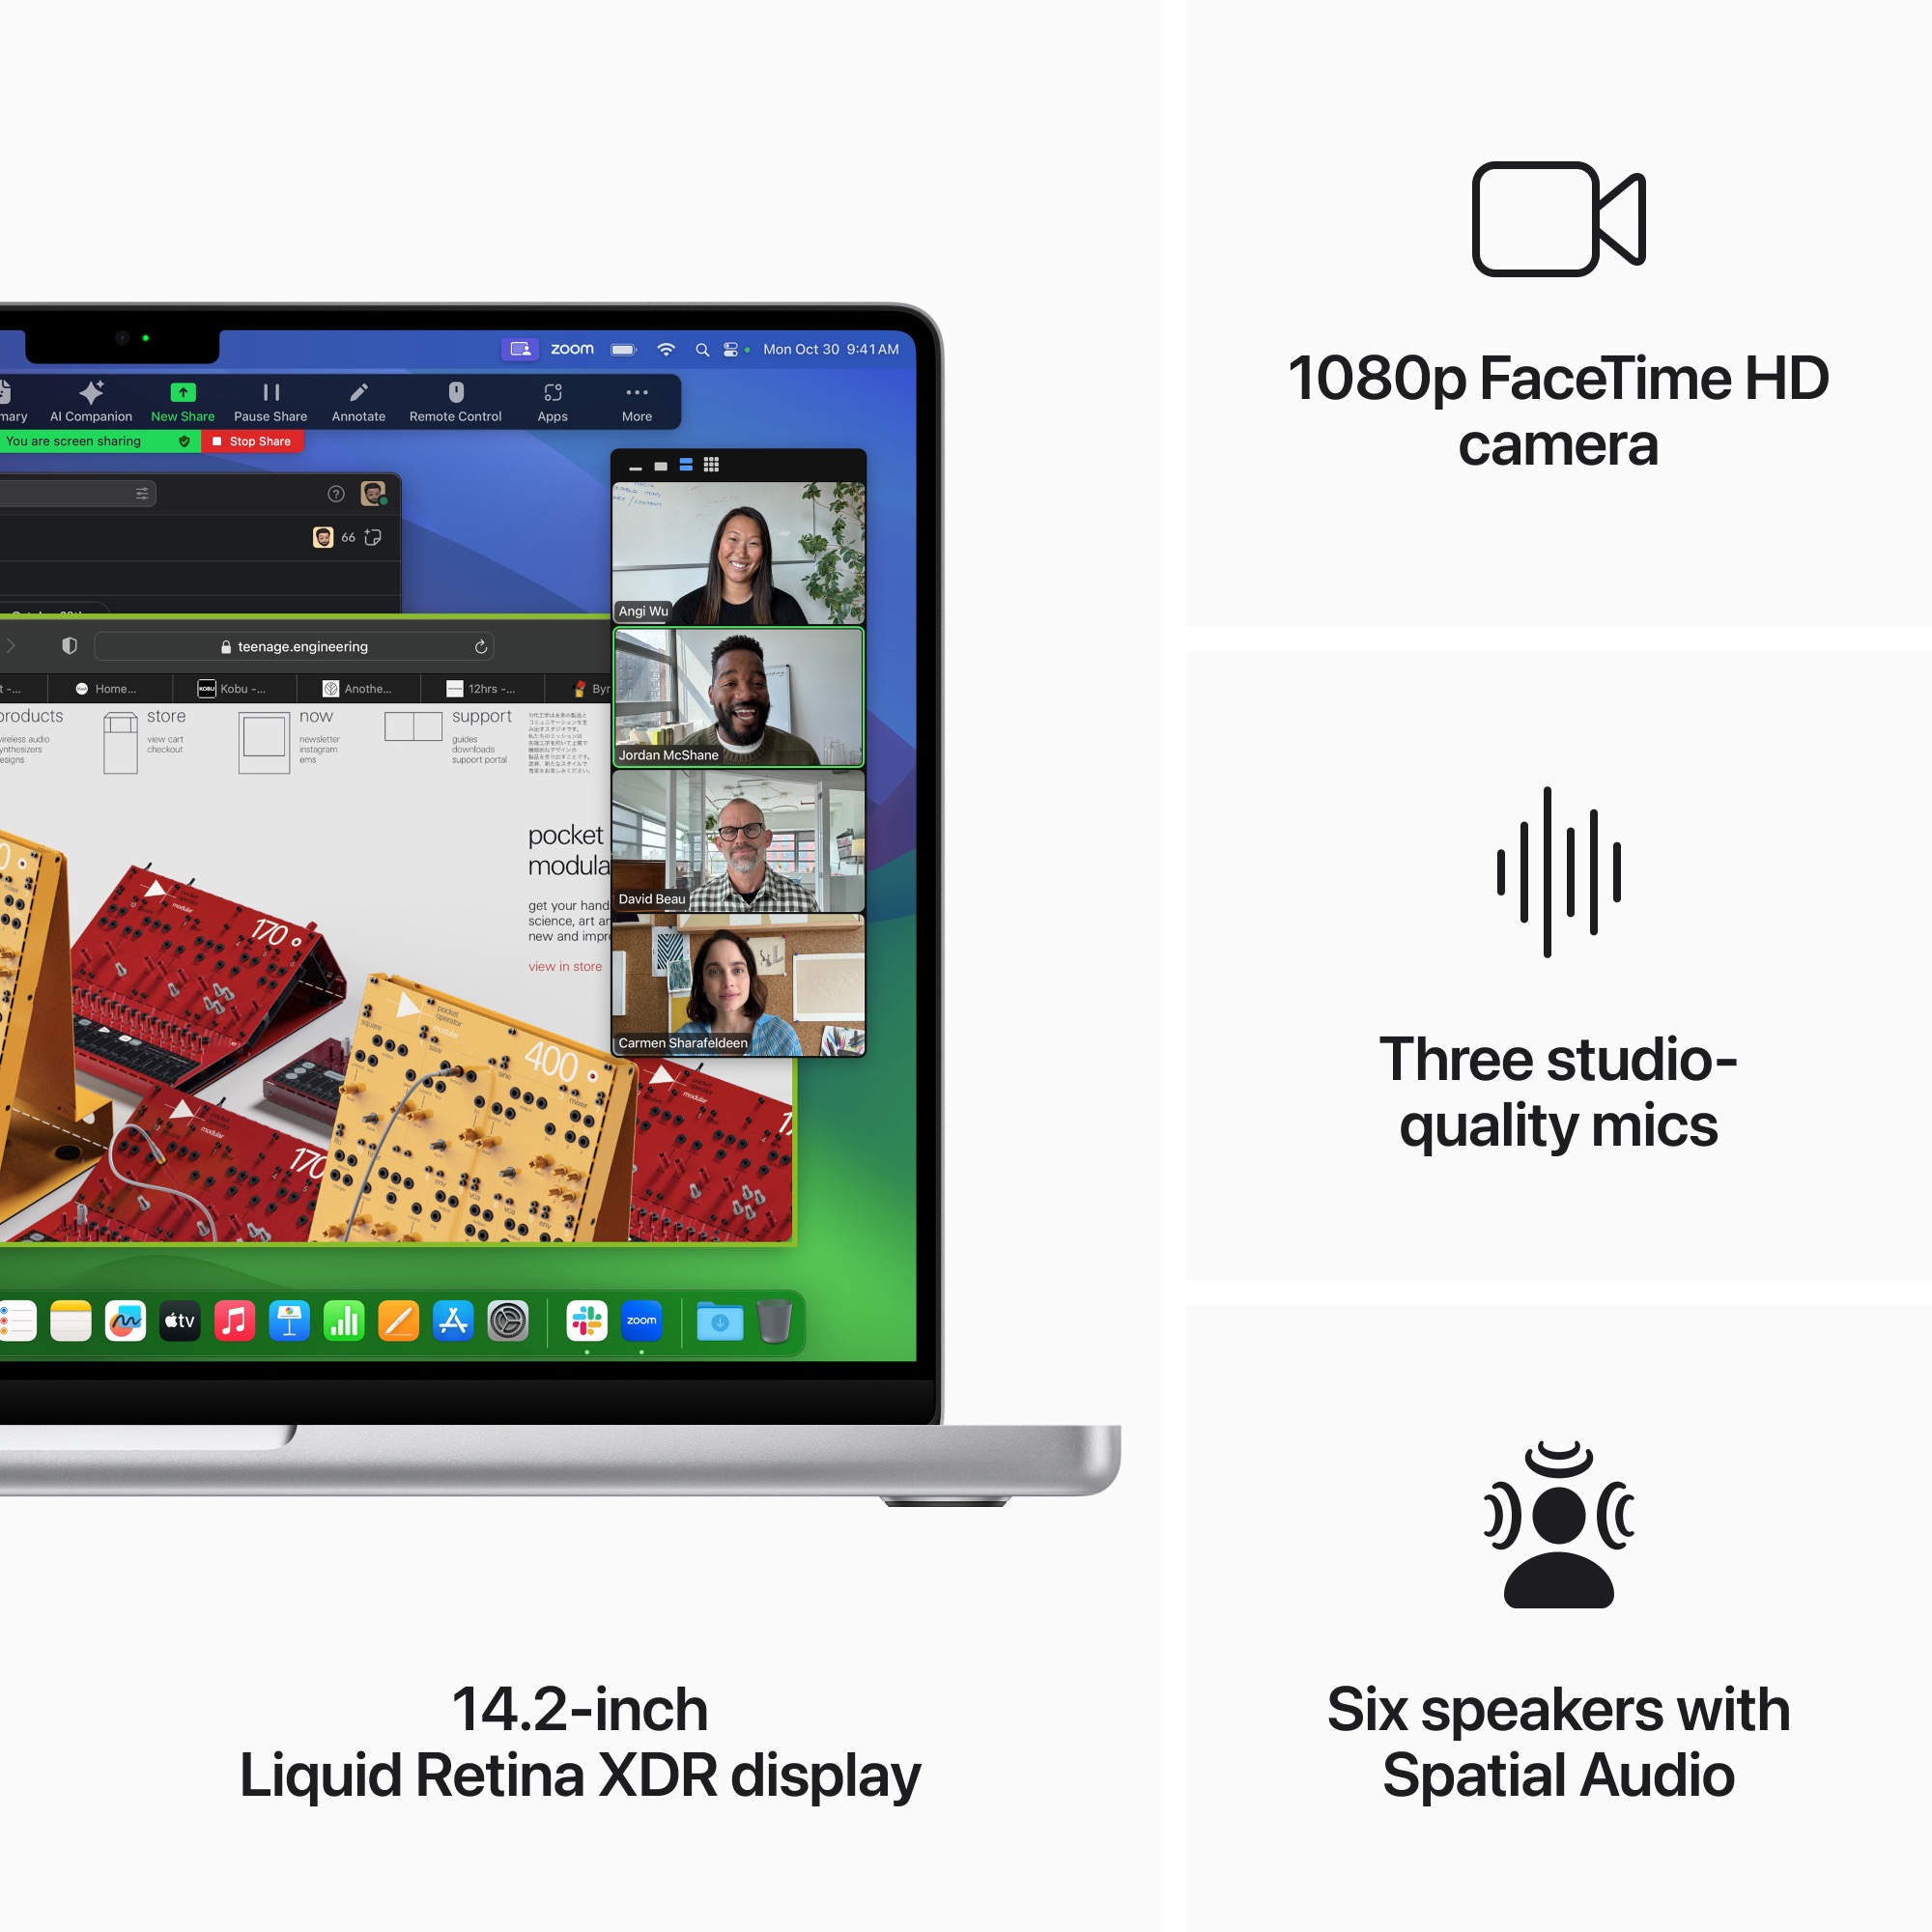 14-inch MacBook Pro: Apple M3 Max chip with 16c CPU and 40c GPU, 1TB SSD - Silver